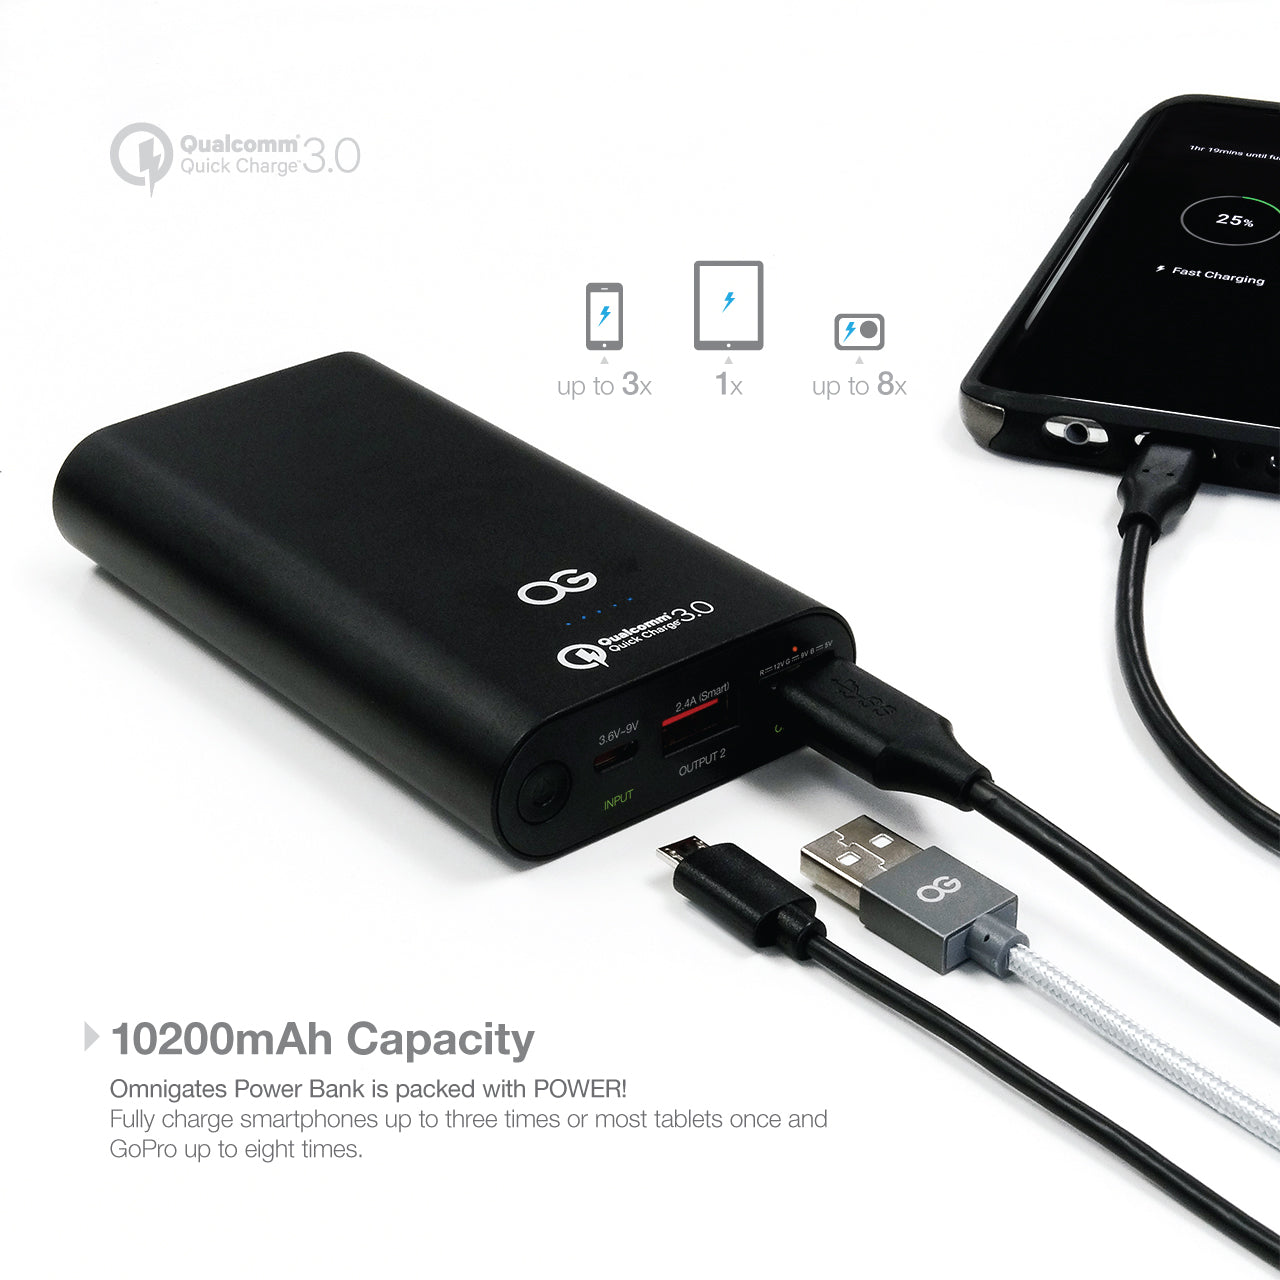 10200mAh Power Bank with Qualcomm Quick Charge 3.0